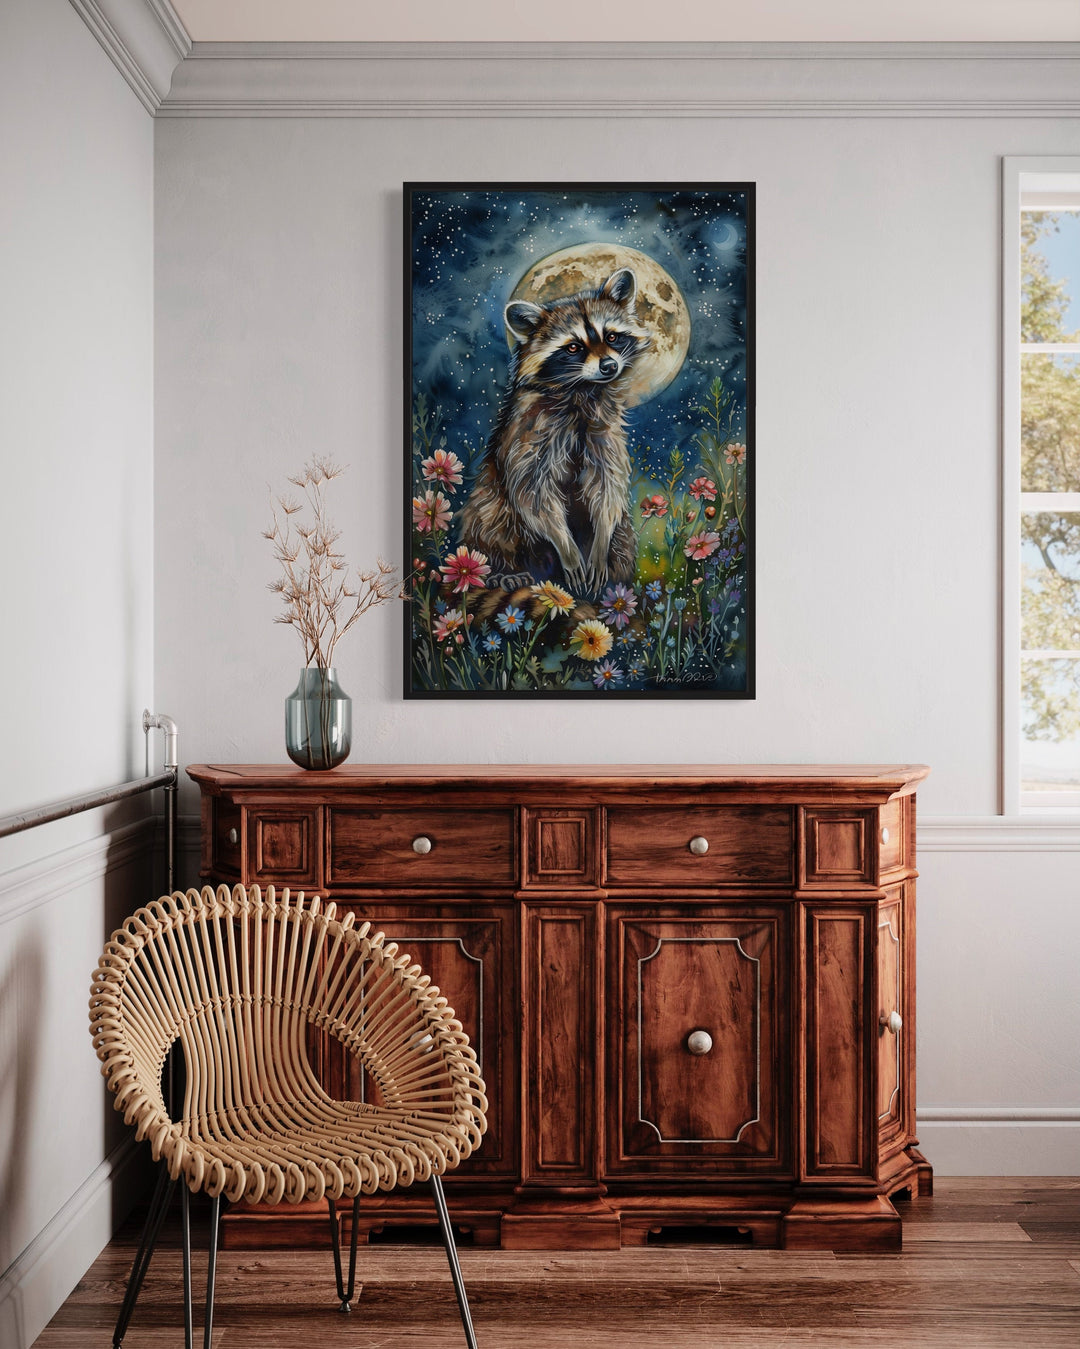 Raccoon in The Meadow At Night Under Moon Framed Canvas Wall Art in bedroom